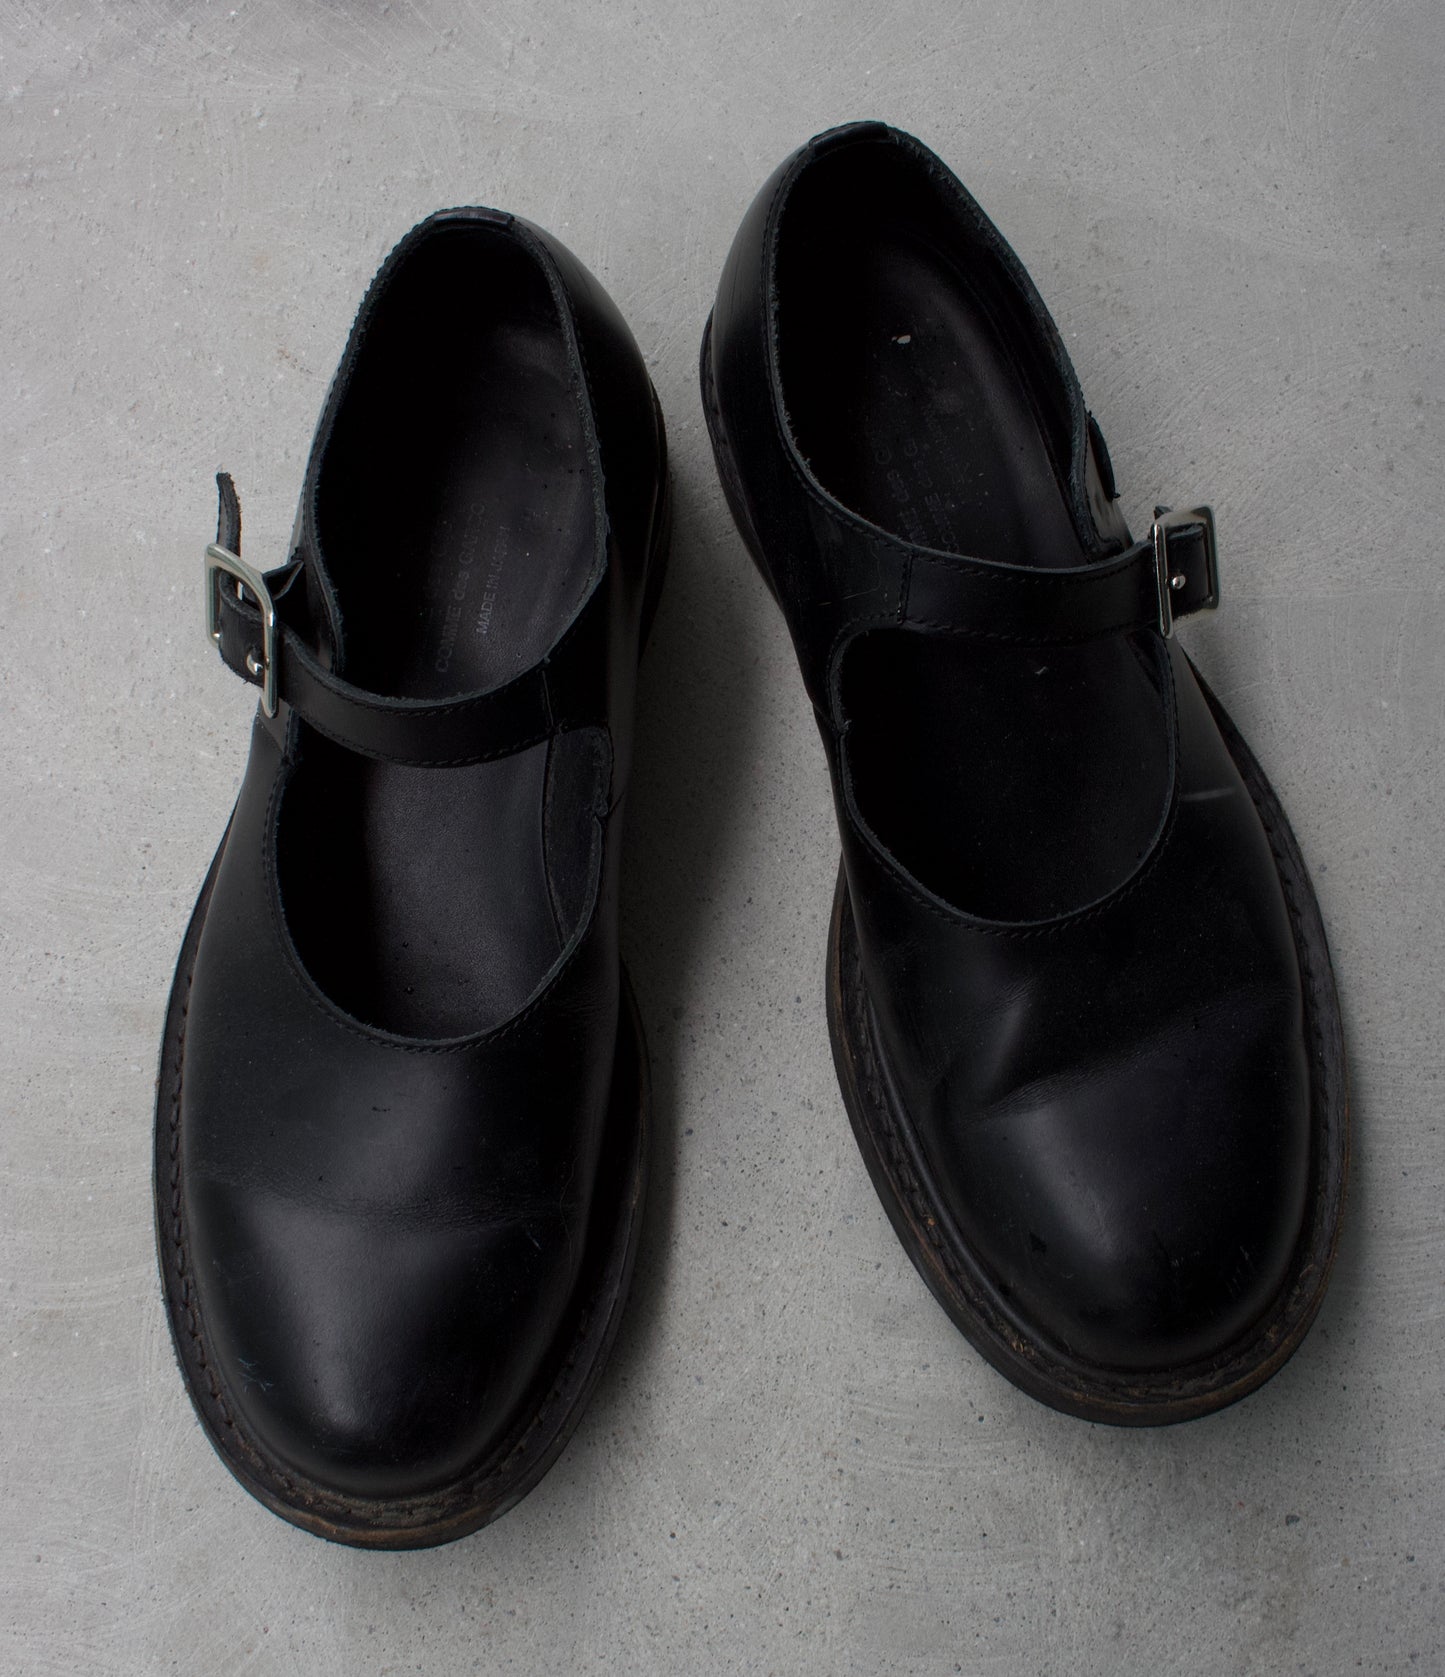 COMME des GARCONS “Mary Jane” Leather Strap Shoes